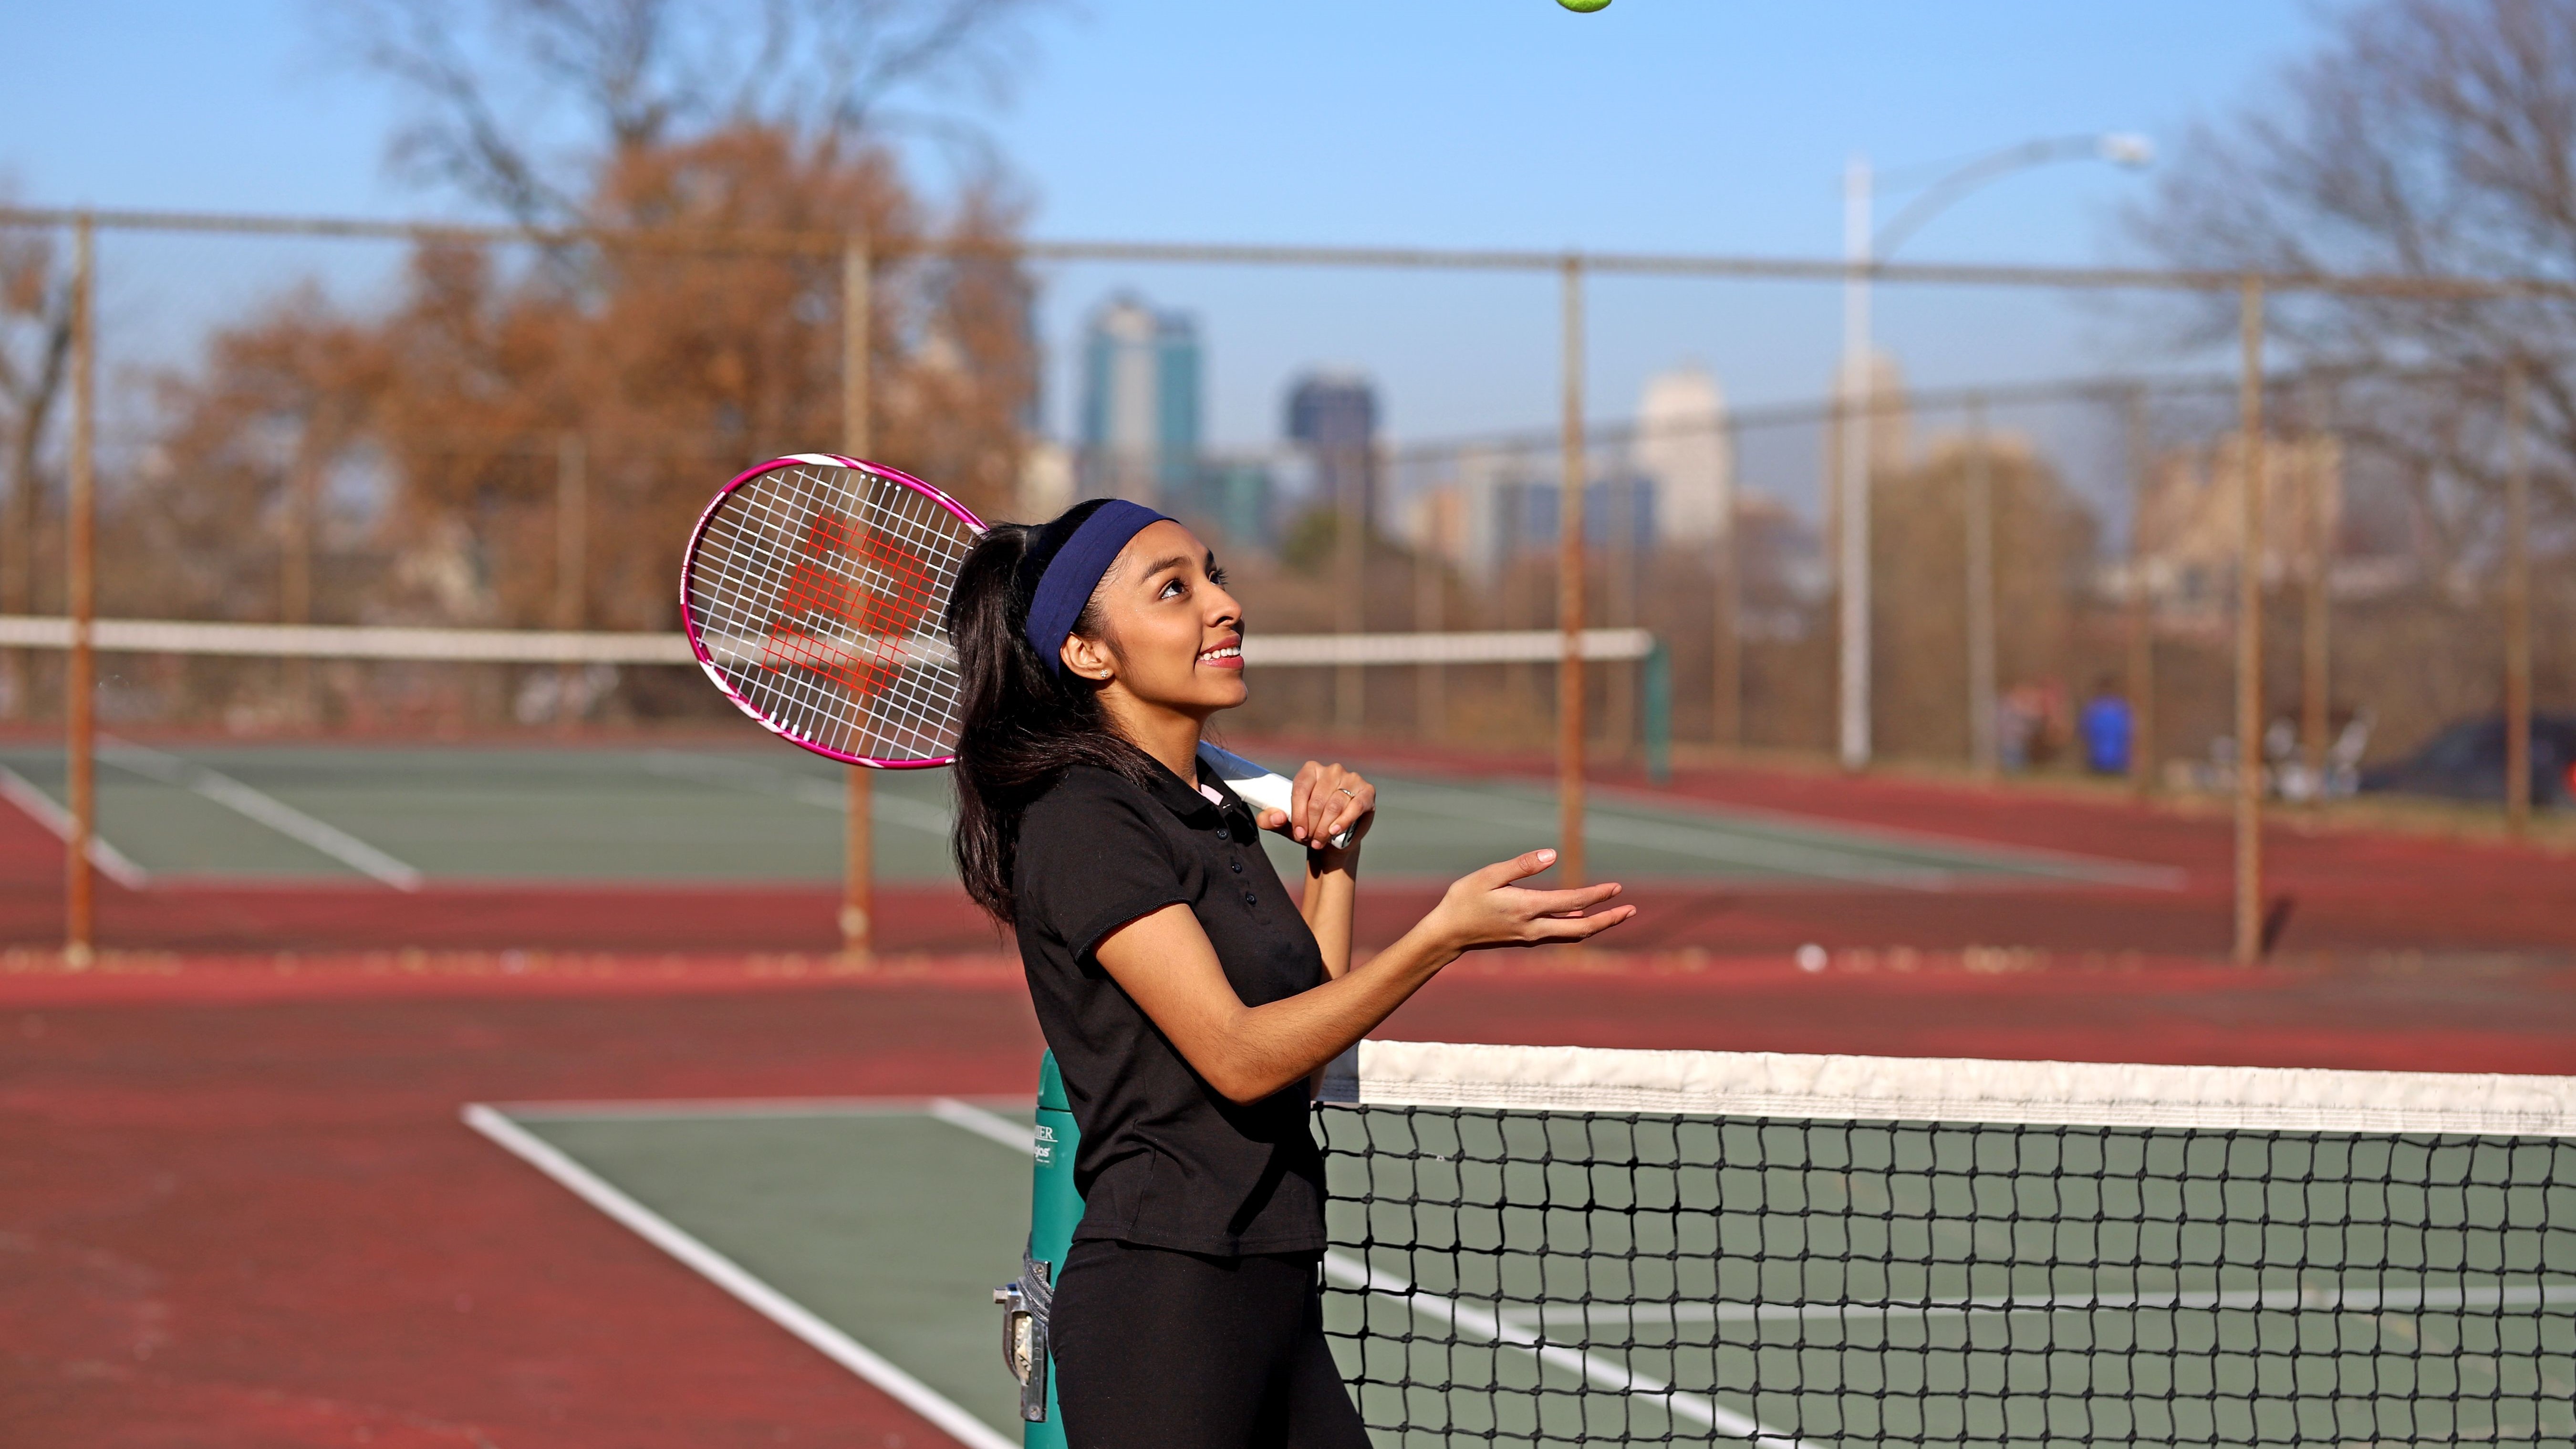 Girl playing tennis in the tennis court